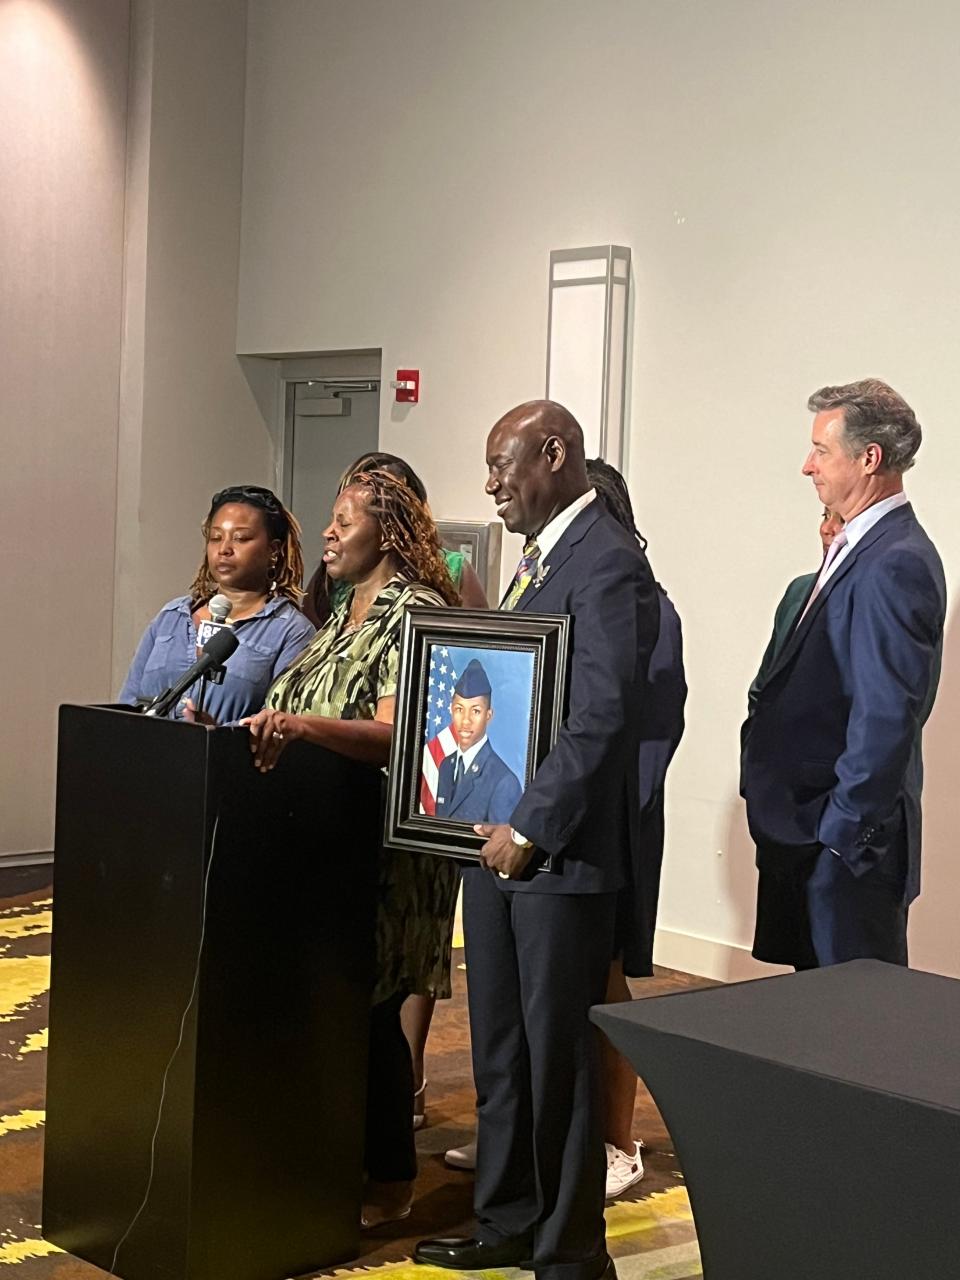 Meka Fortson, the mother of Senior Airman Roger Fortson, speaks about the officer-involved shooting death of her son as attorneys Ben Crump and Brian Barr look on.